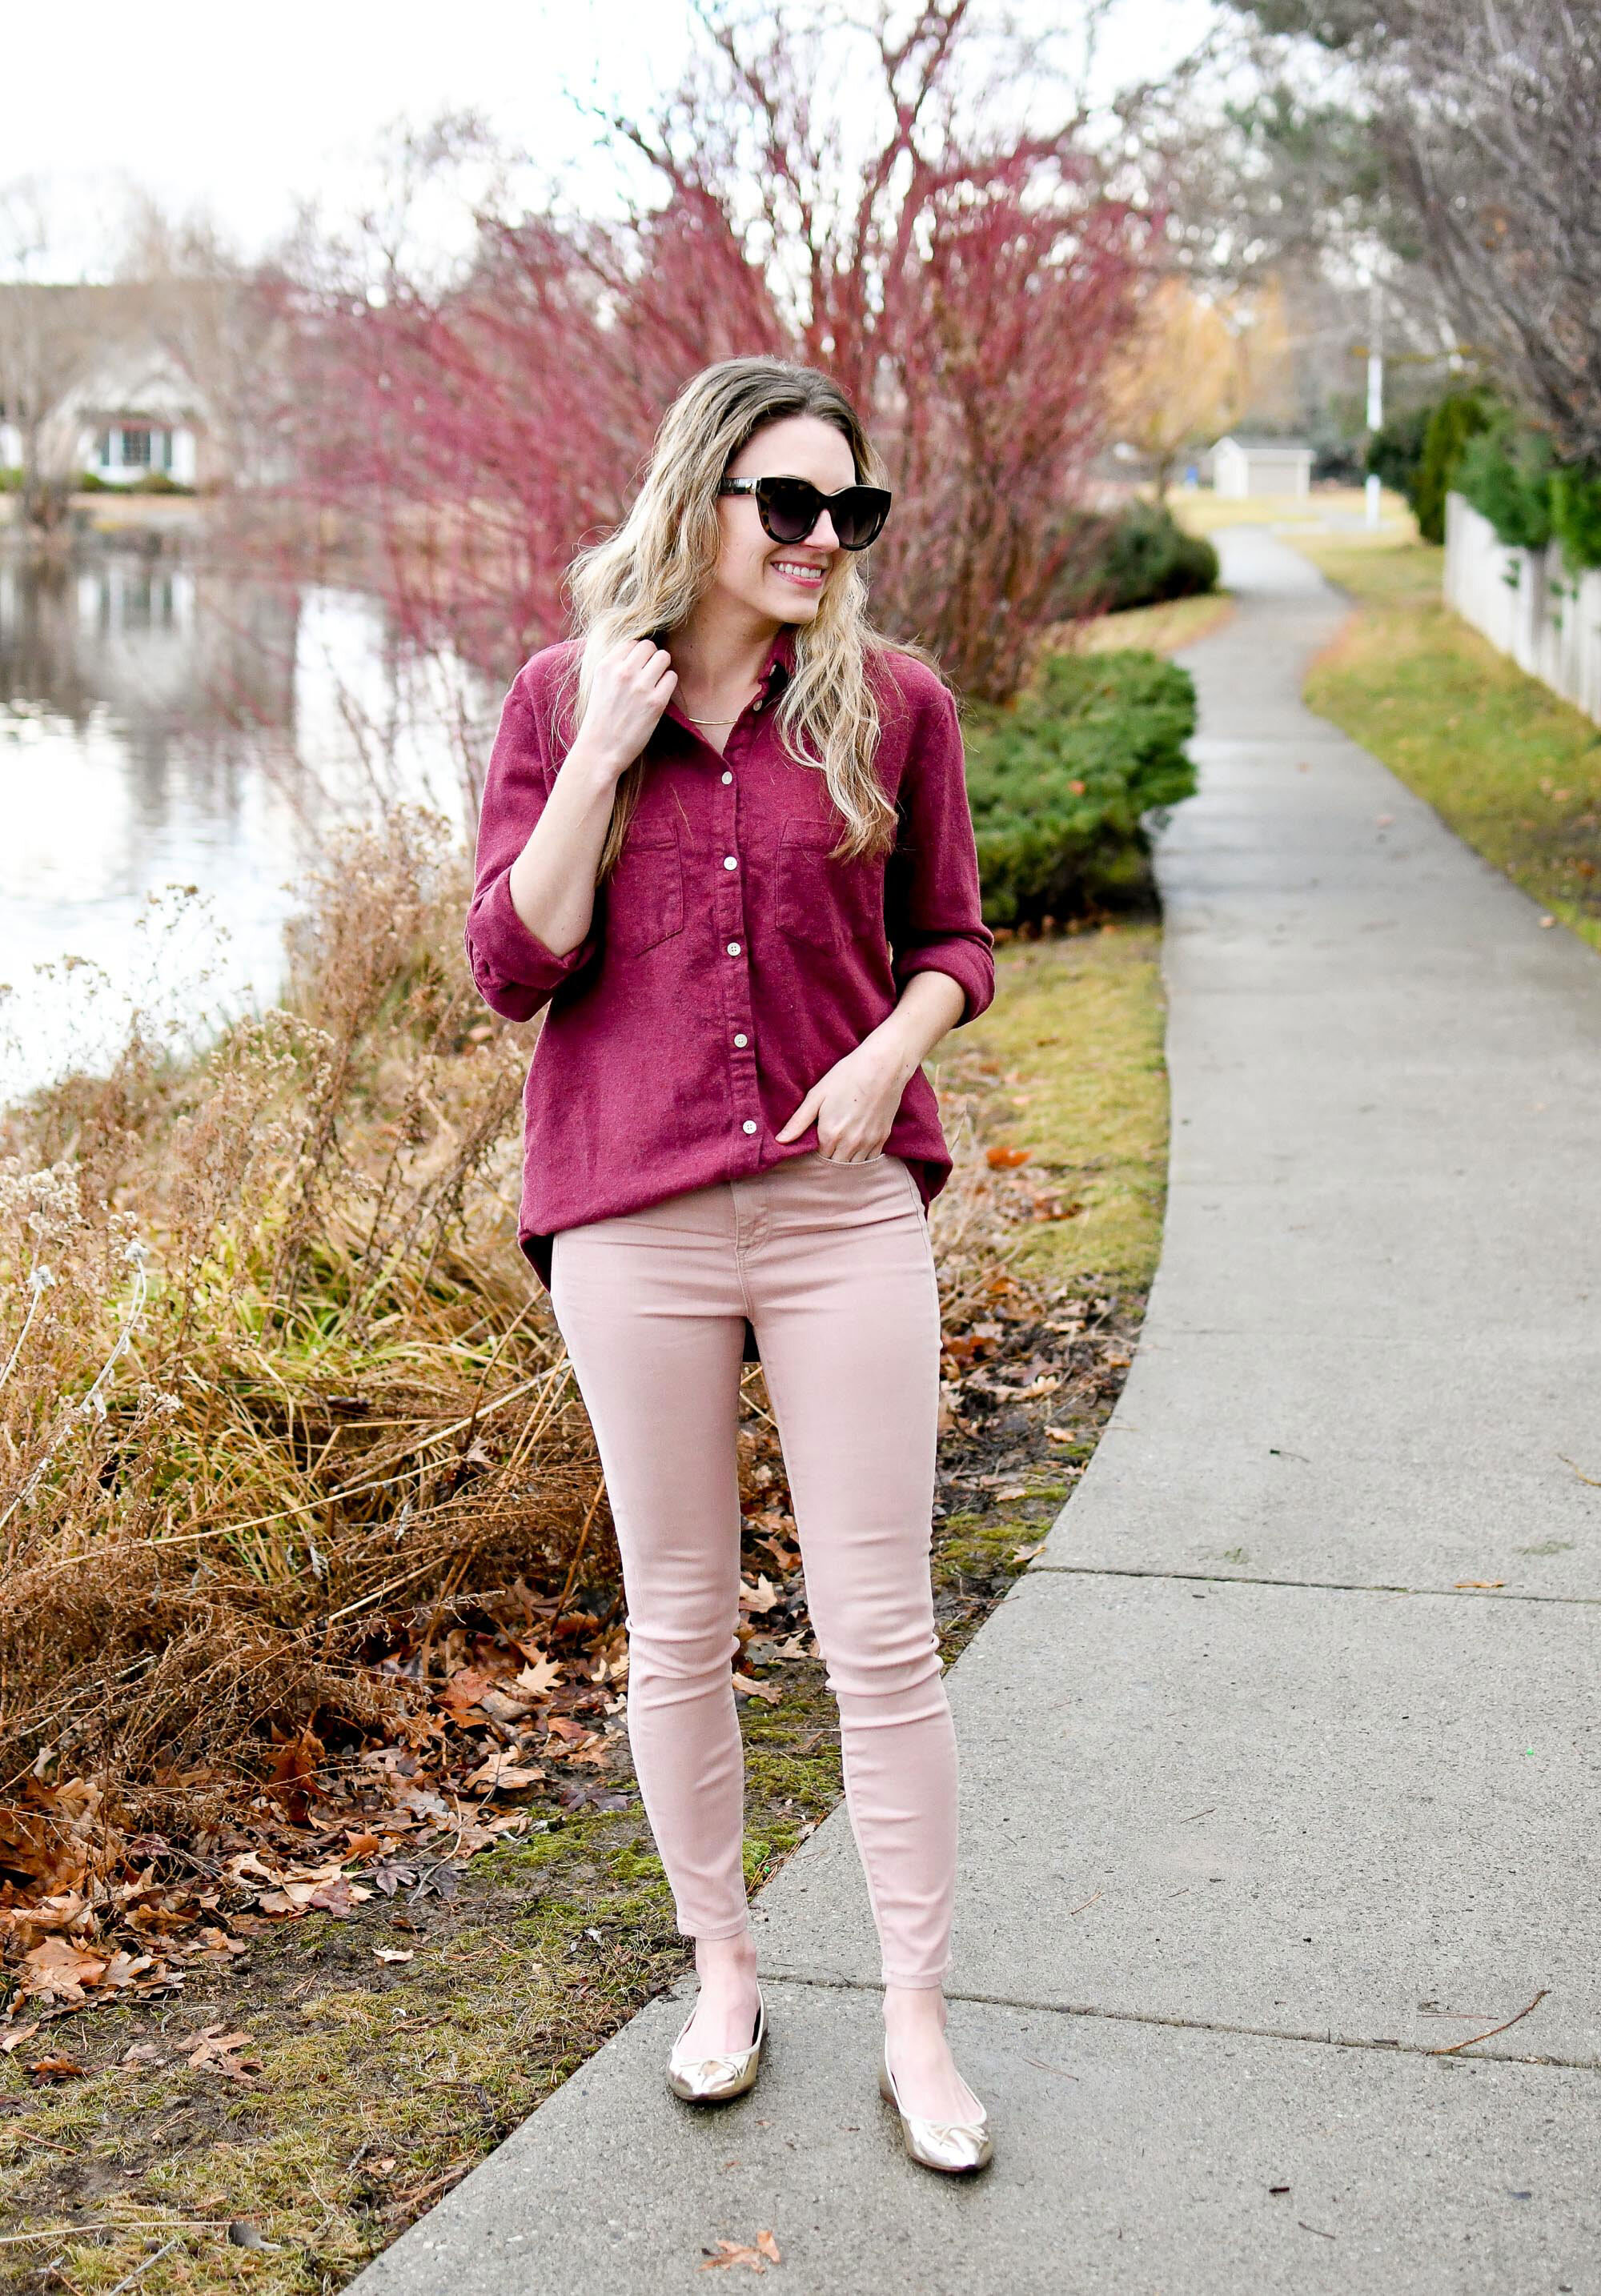 Light Pink Skinny Jean Outfit Ideas for Every Season